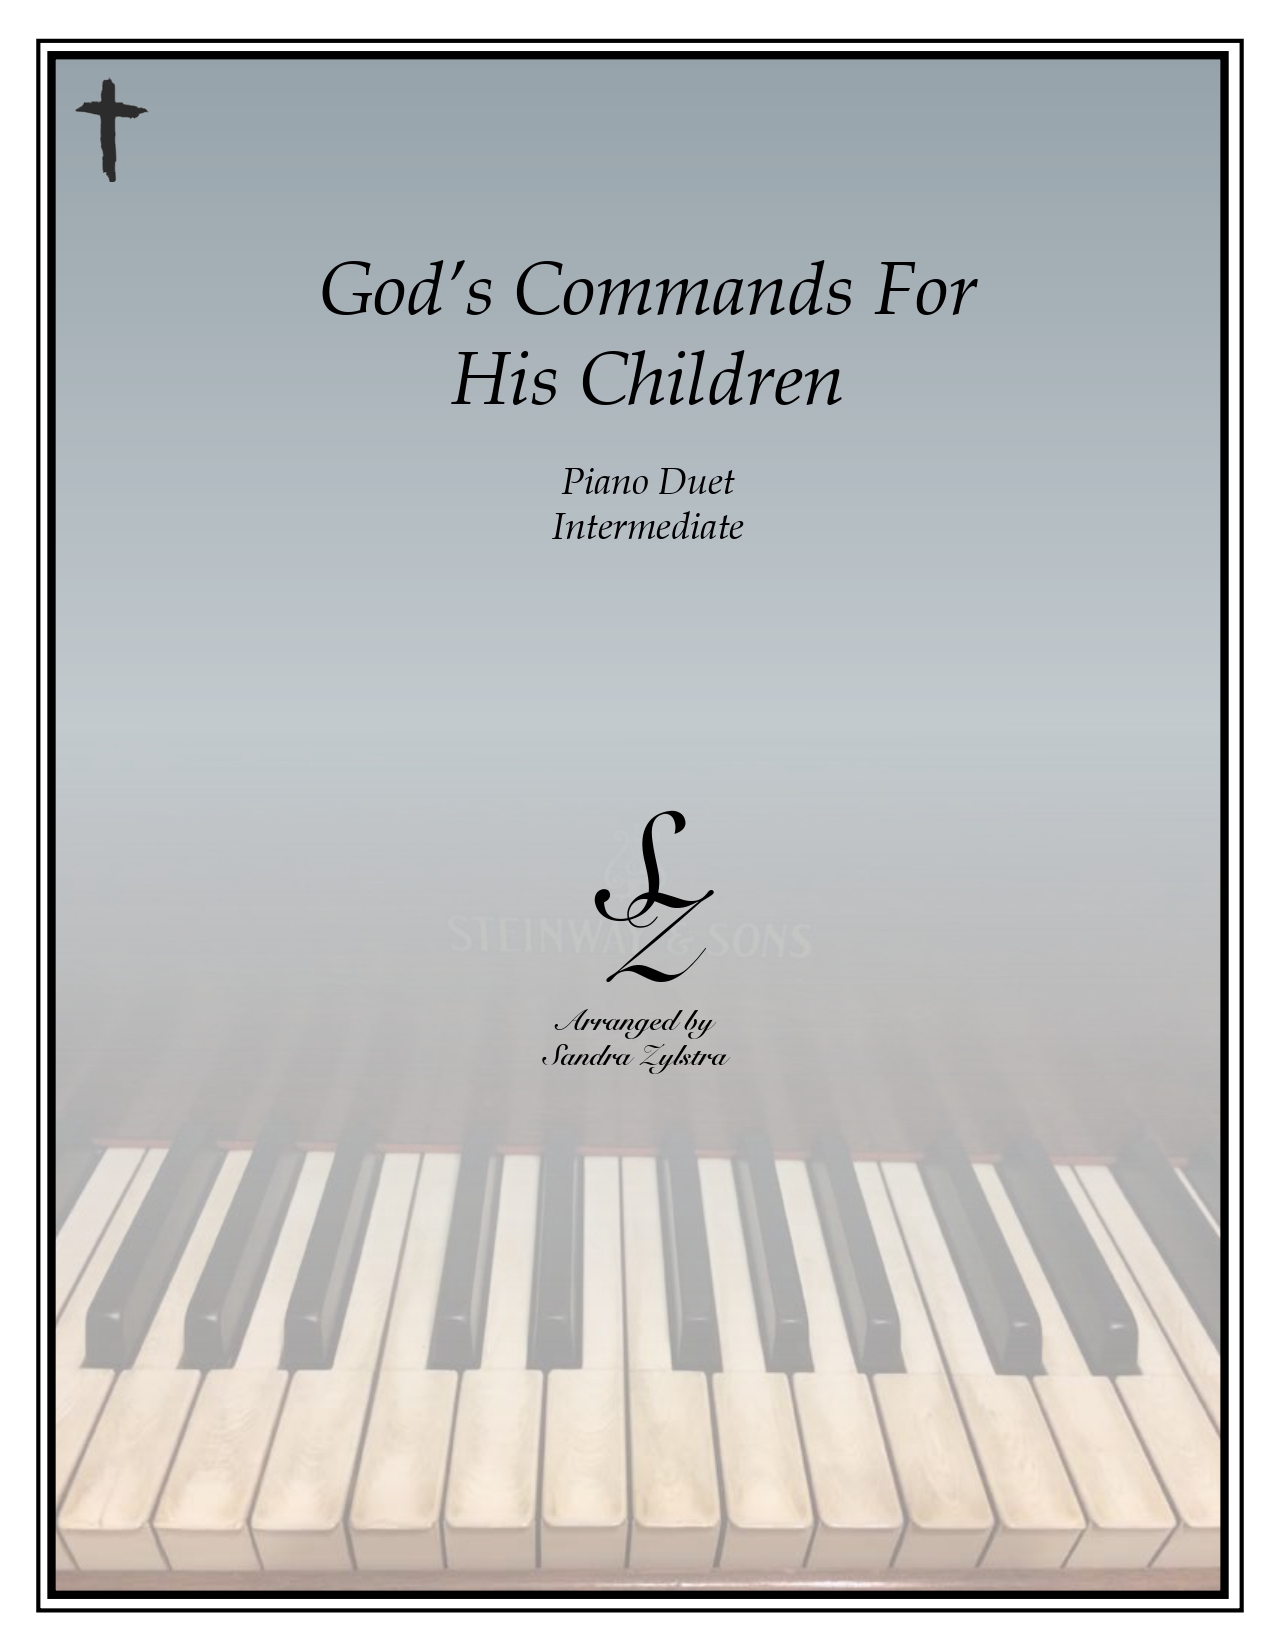 Gods Commands For His Children intermediate duet cover page 00011